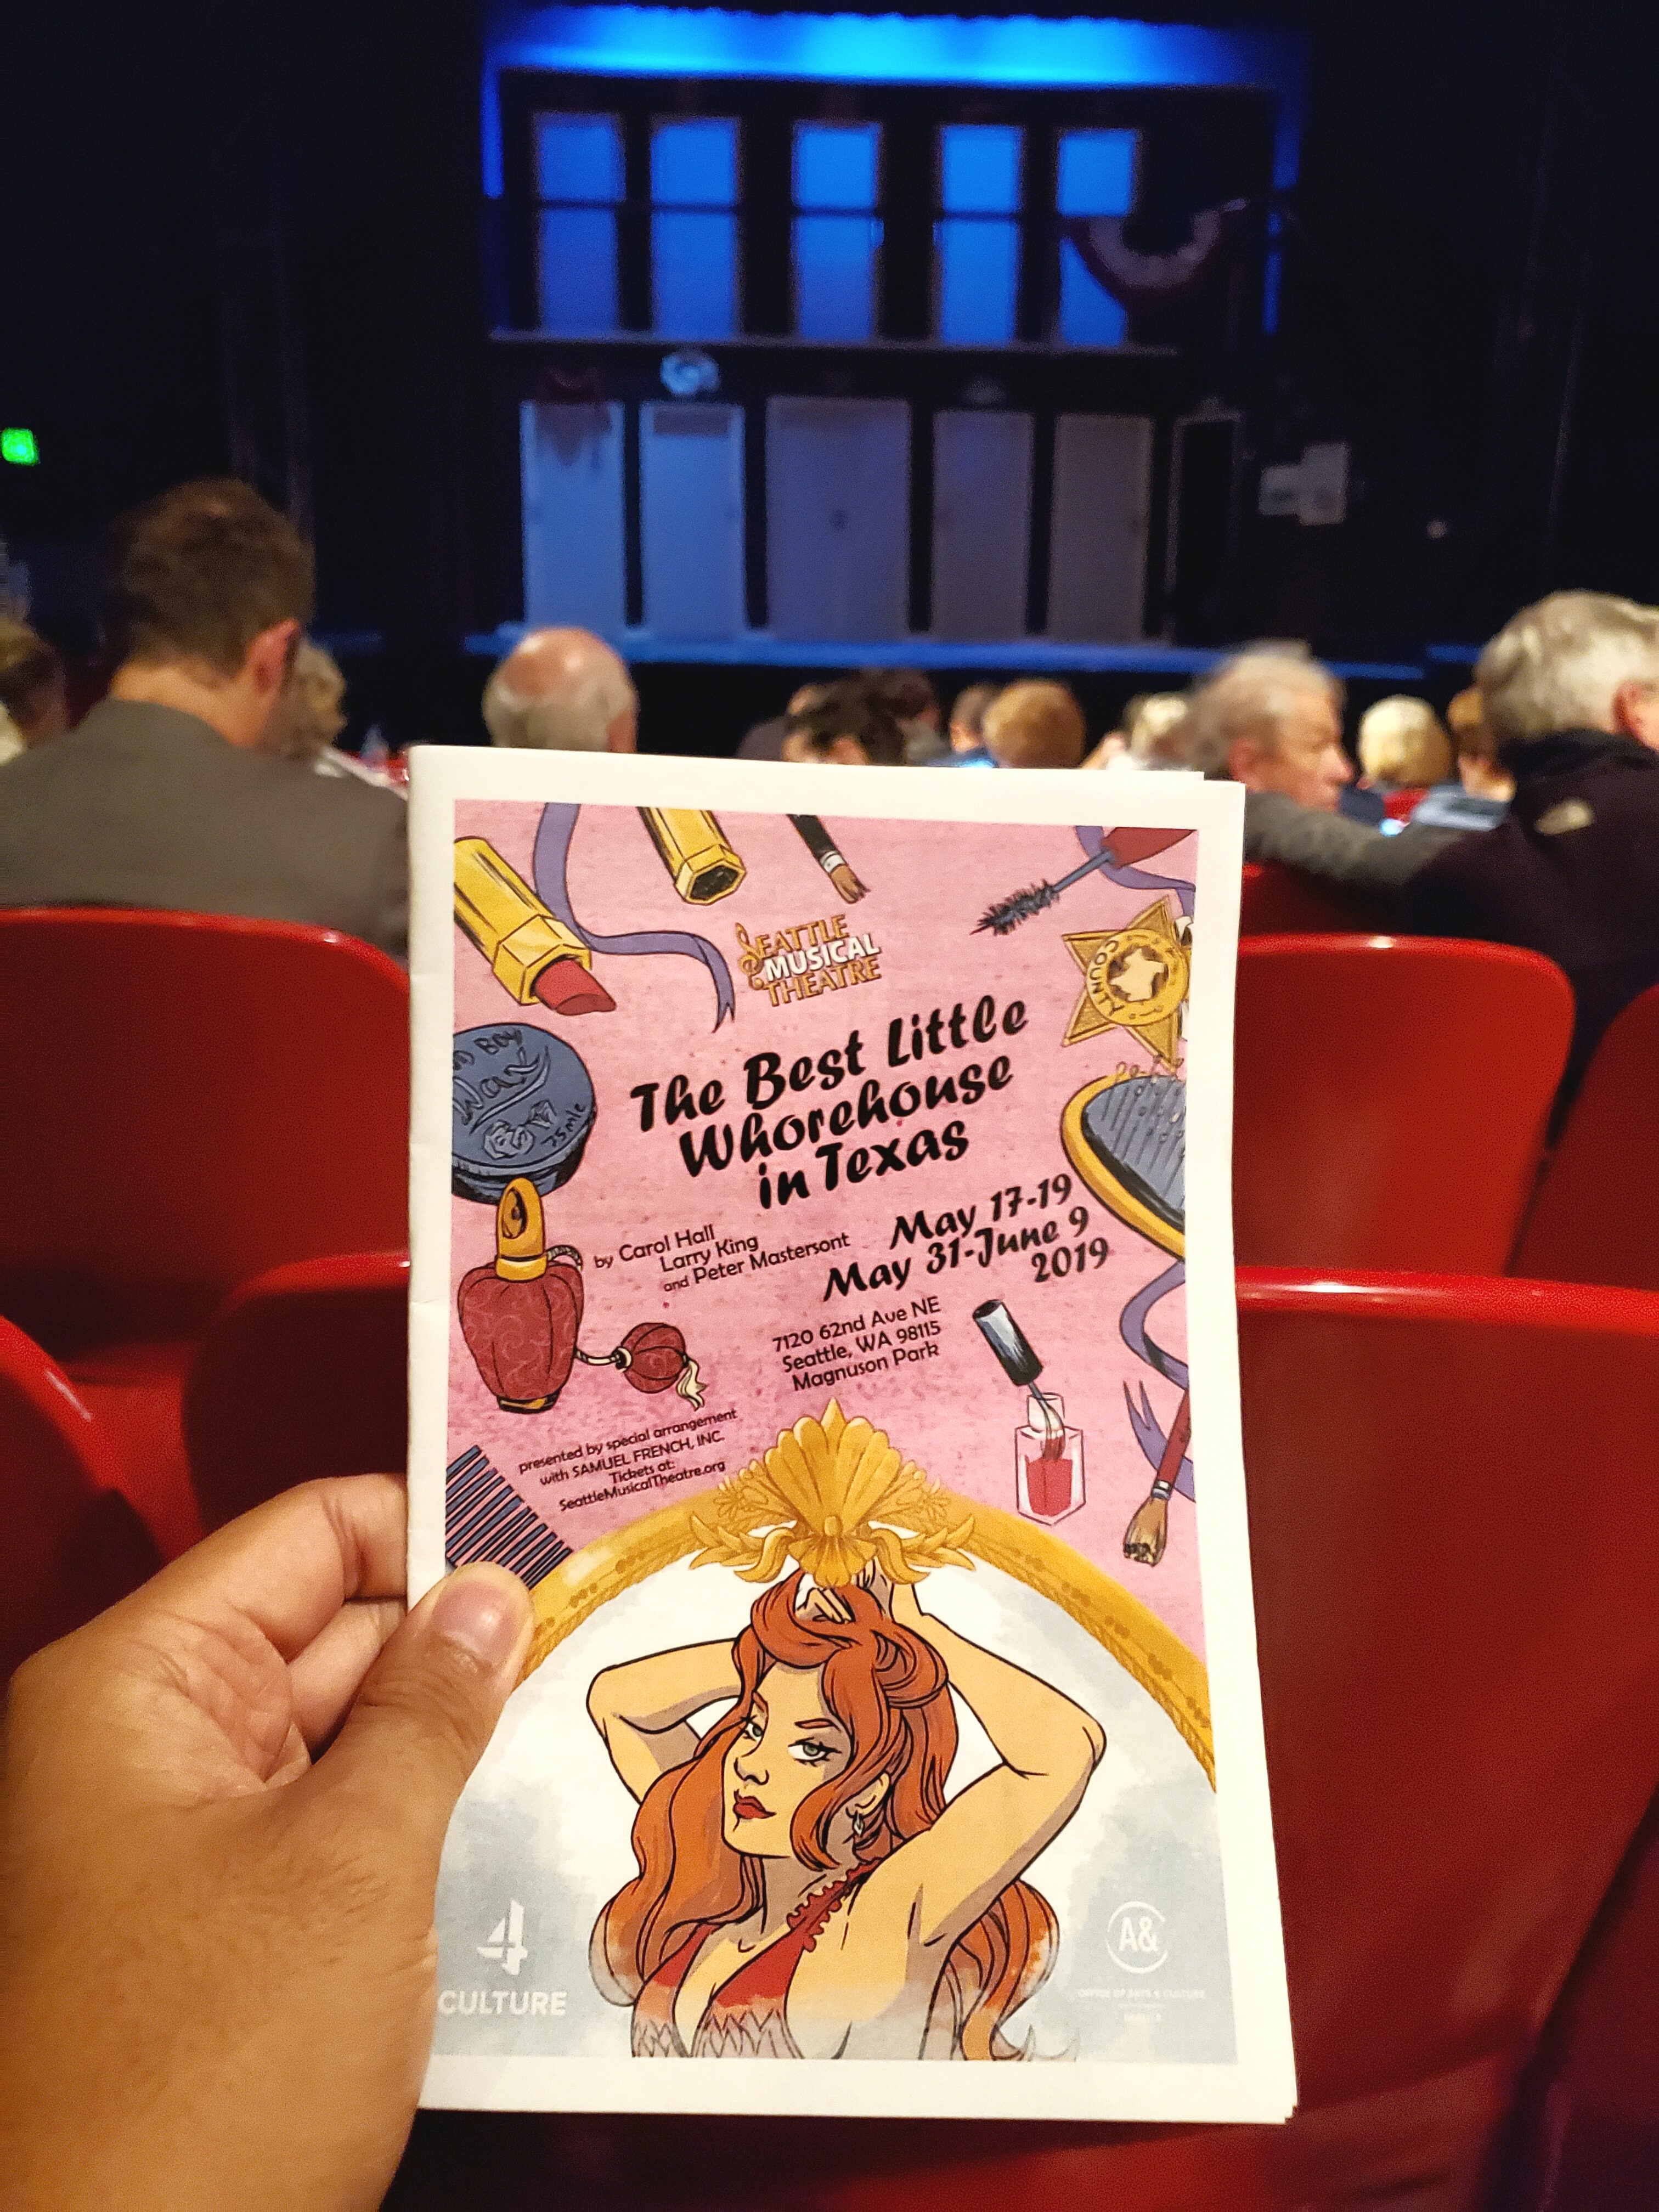 Stage #musical production of The Best Little WhoreHouse In Texas w/ Raymund at Seattle Musical Theatre. Some good songs & awesome Miss Mona actress. But slow dialogue, awkward transitions, & terrible microphones. #Texas #Brothel